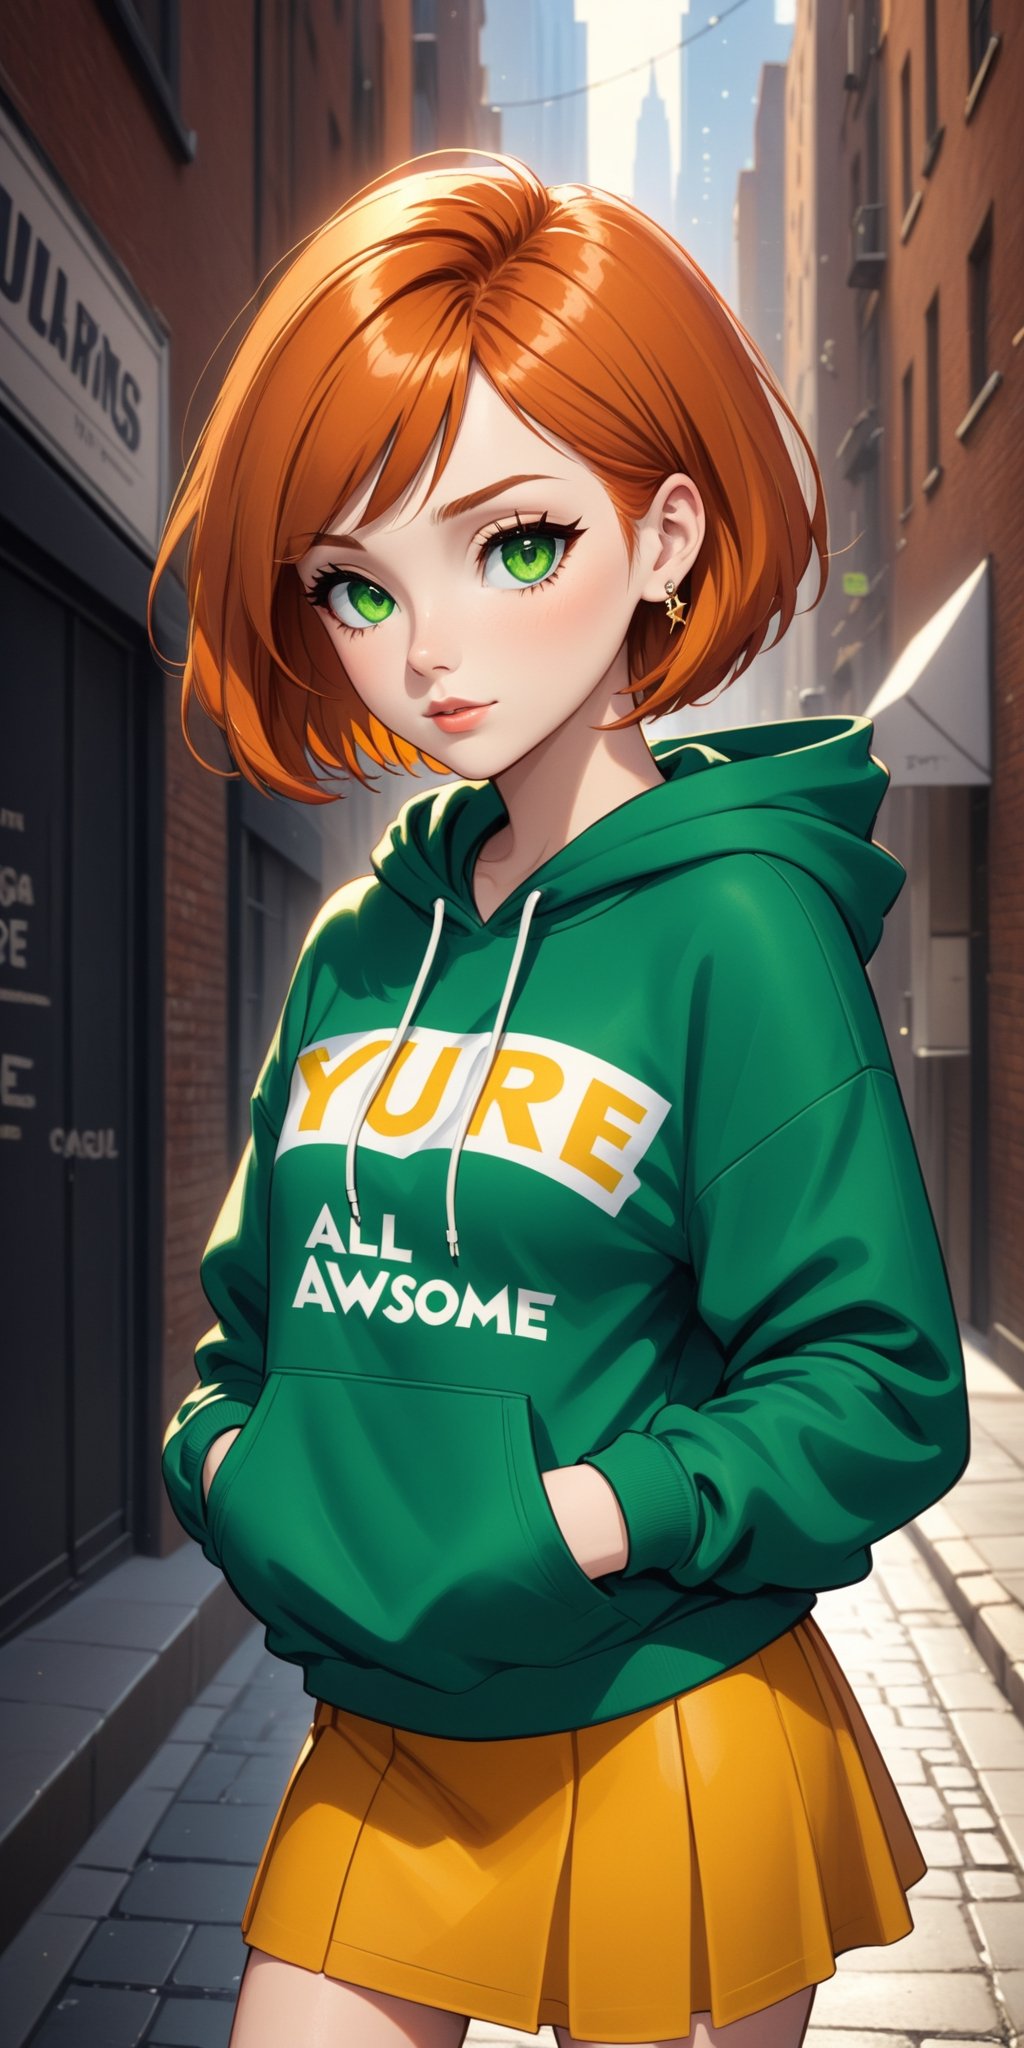 cartoon style, 2D,
1girl, ginger, short stylish bob haircut, green eyes, make up, jewerly, hoodie with text as "you're all awesome", medium length skirt,
city alley background, detailed, elegant background, 
masterpiece, high quality, high_res, HDR